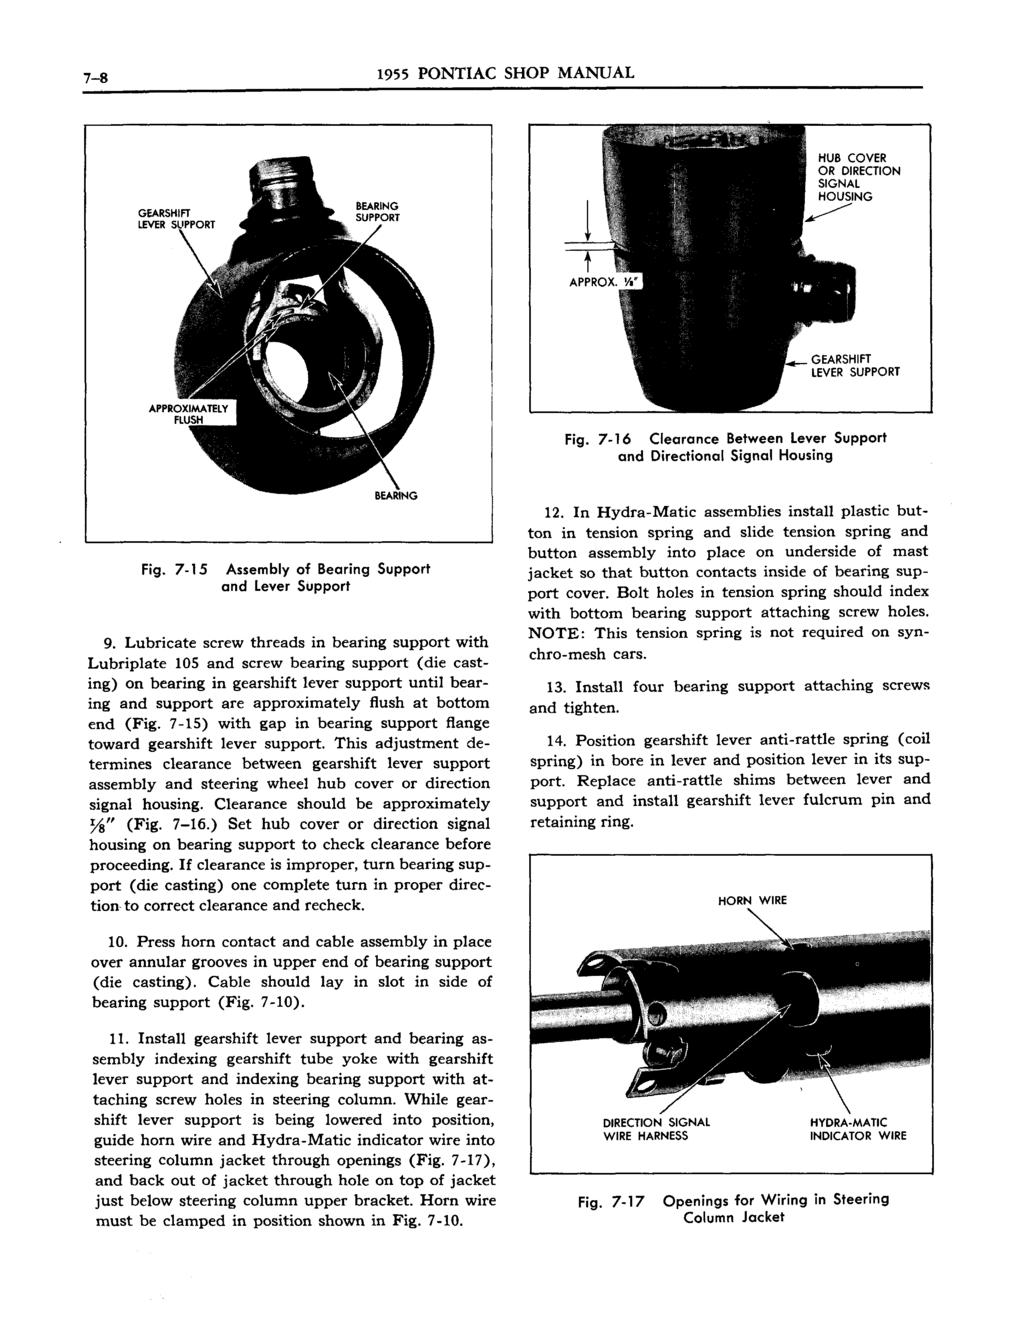 7-8 1955 PONTIAC SHOP MANUAL GEARSHIFT LEVER SUPPORT Fig. 7-16 Clearance Between Lever Support and Directional Signal Housing Fig. 7-15 Assembly of Bearing Support and Lever Support 9.